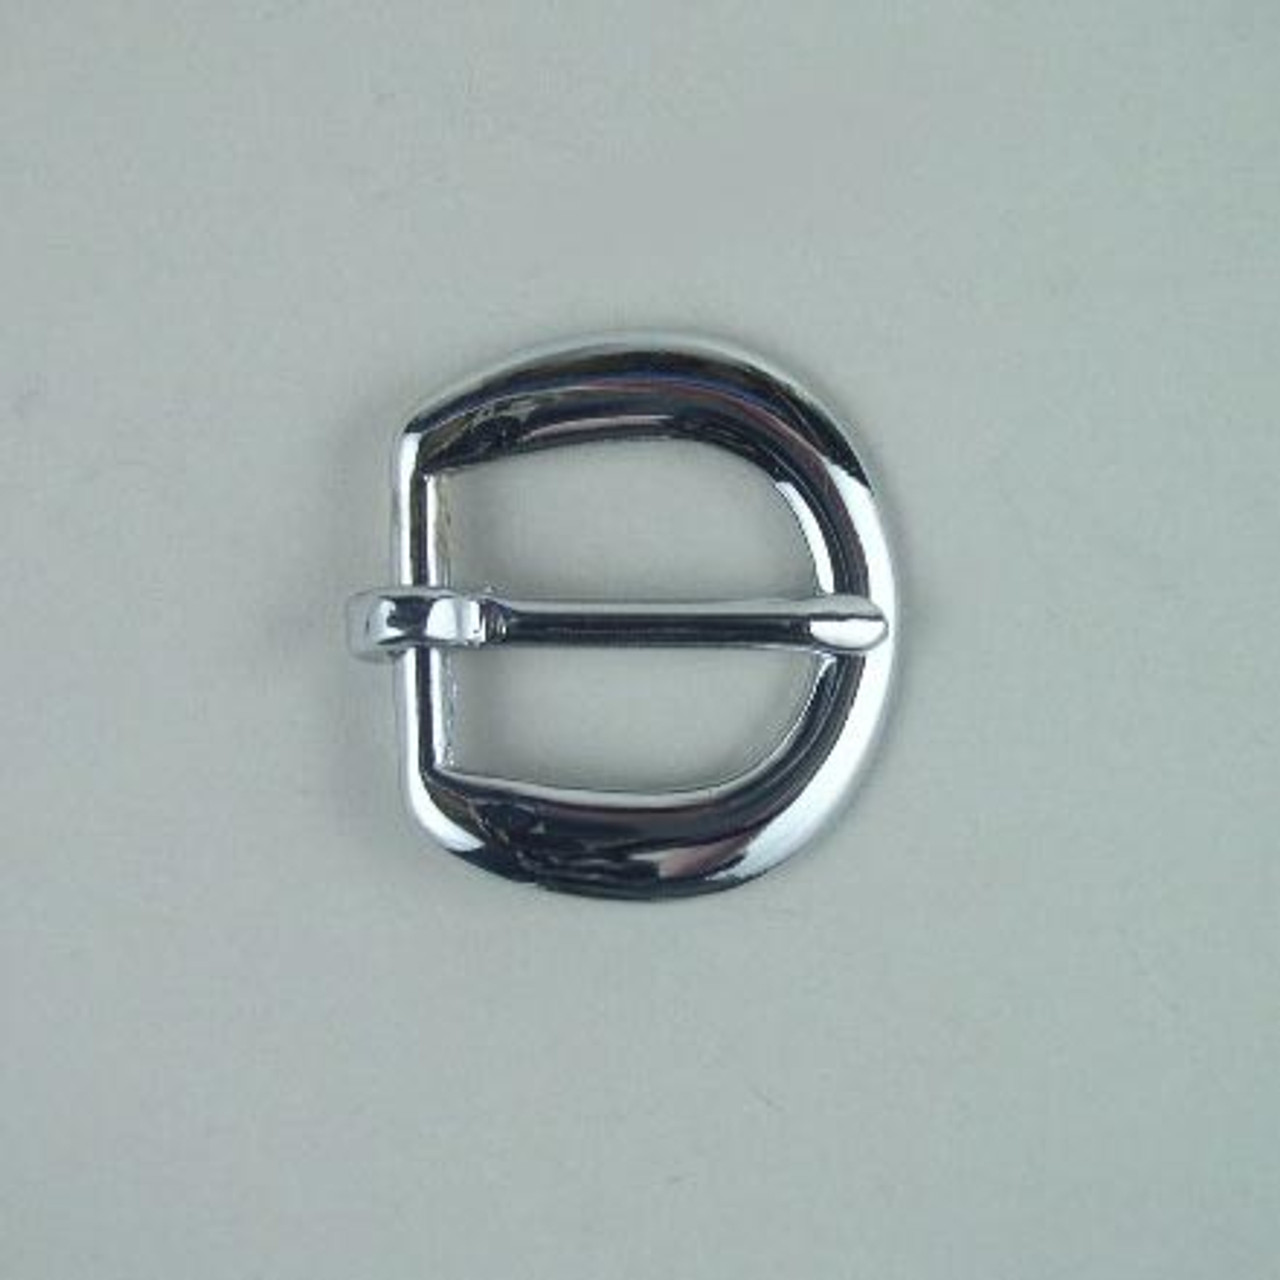 2 inch Roller Buckles Stainless Steel Belt And Strap Buckle - RB200SS